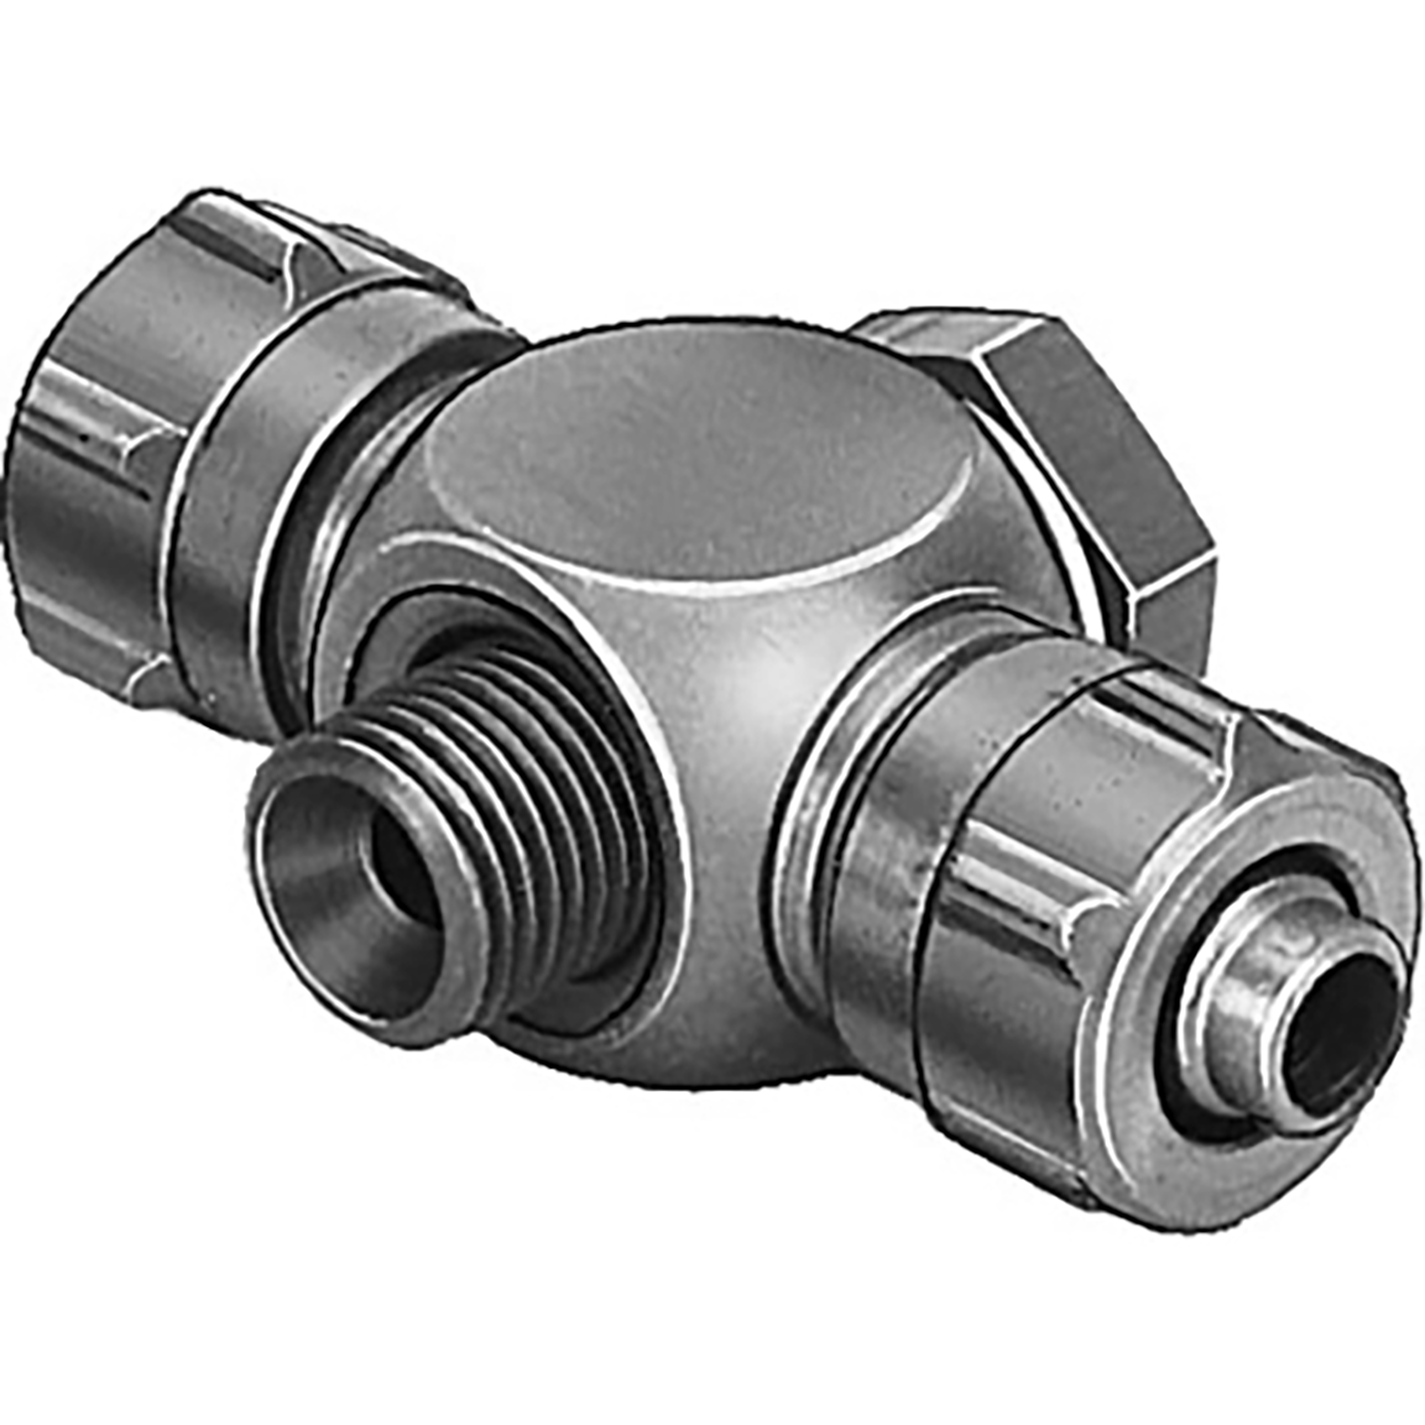 TCK-M5-PK-3 QUICK T-CONNECTOR sold in multiples of 10 only